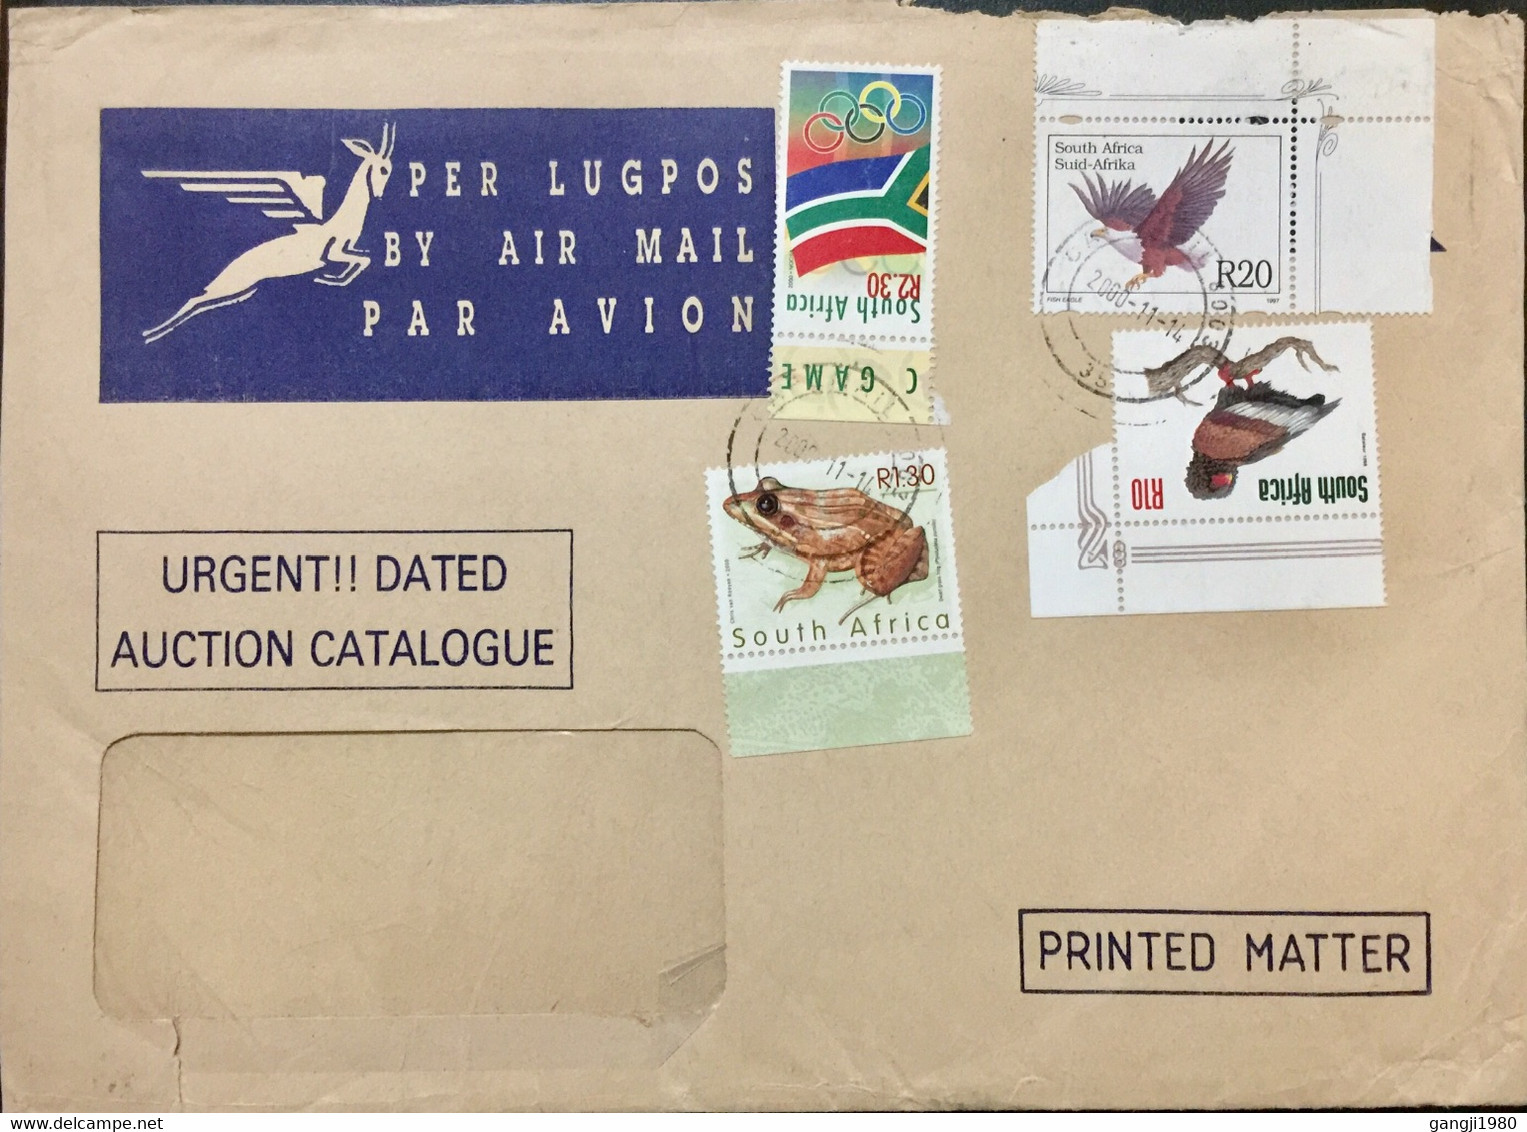 SOUTH AFRICA 2000 ,AIRMAIL FLYING DEER -PRINTED USED COVER, BIRD, FROG ,OLYMPIC, 4 DIFFERENT STAMP USED - Briefe U. Dokumente